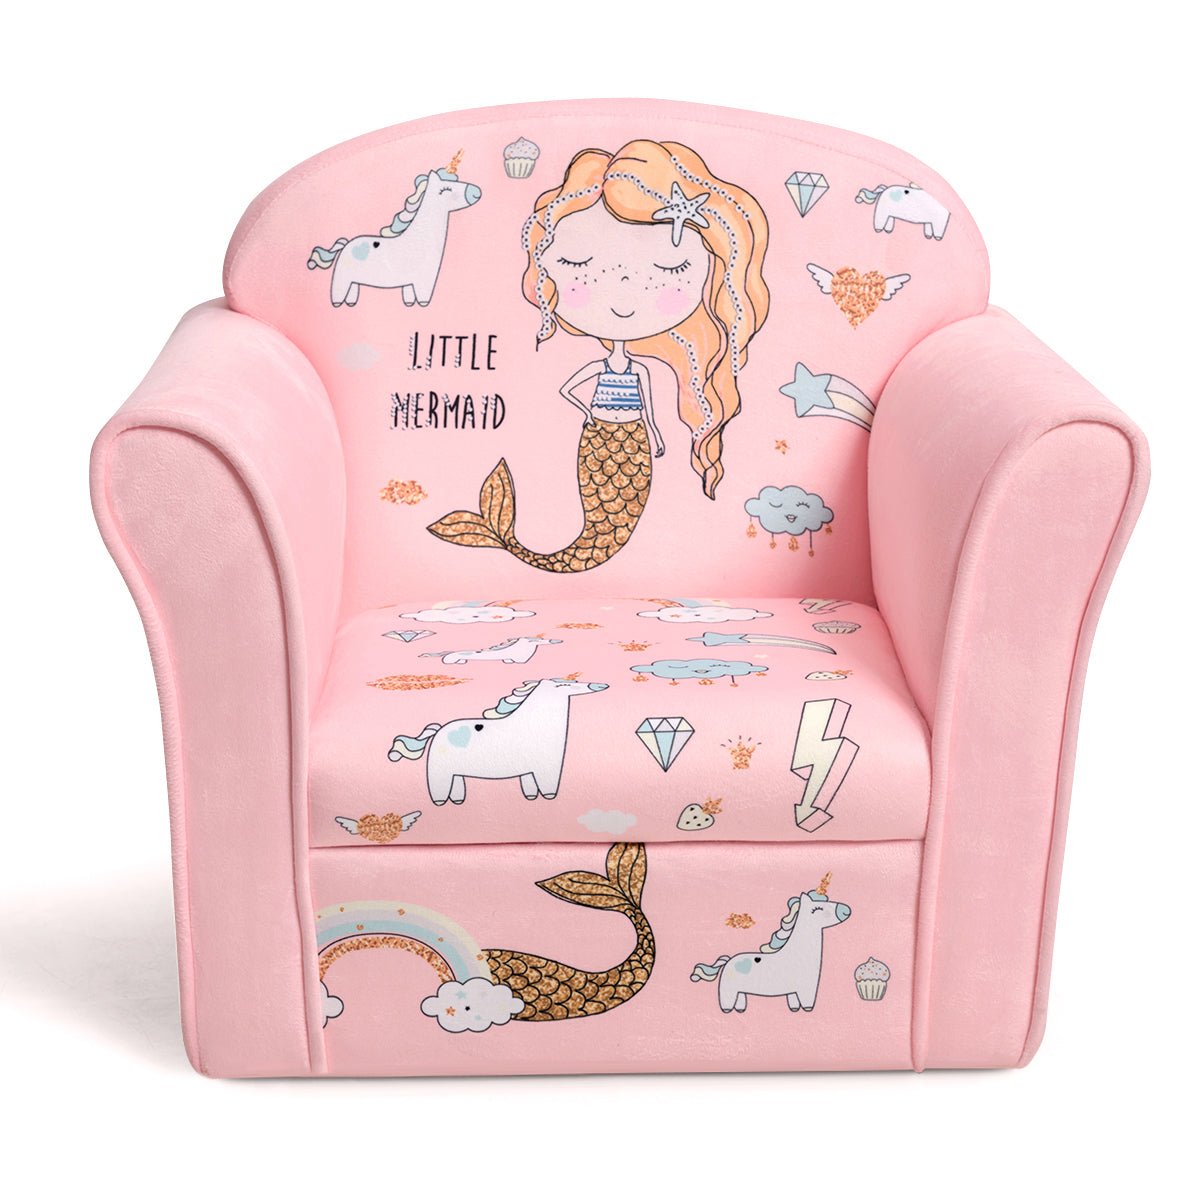 Children's Sofa with Whimsical Mermaid Design: Elevate Bedroom Comfort and Charm